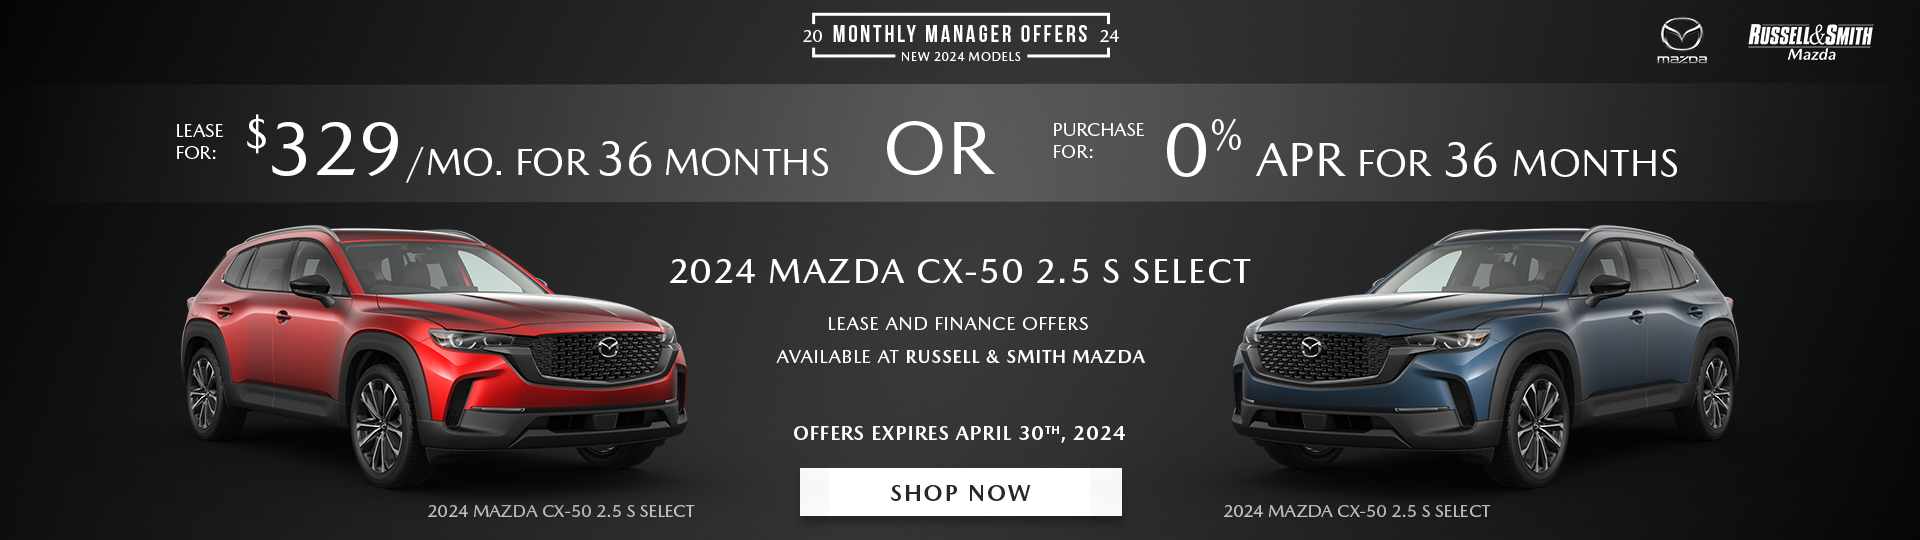 2024 Mazda CX-50 lease deals and finance specials